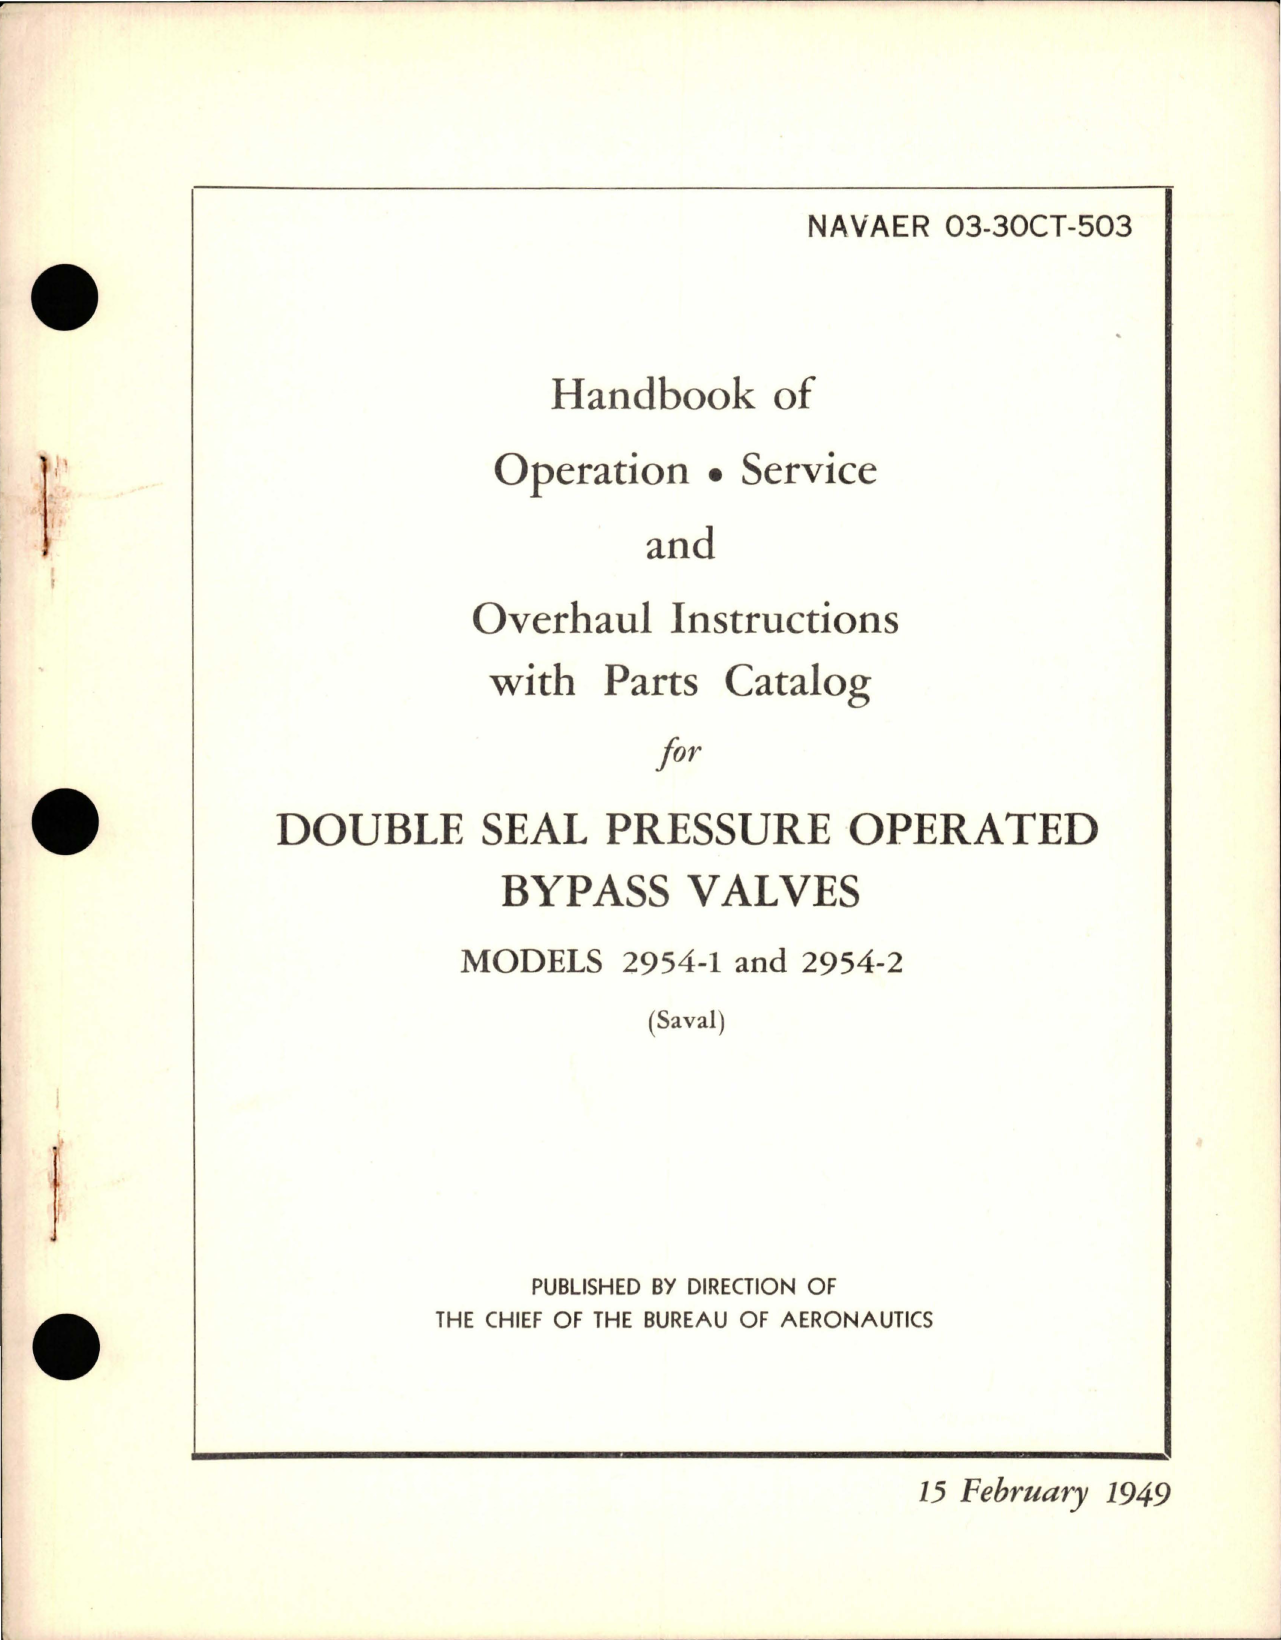 Sample page 1 from AirCorps Library document: Operation, Service, Overhaul Instructions with Parts for Double Seal Pressure Operated Bypass Valves - Models 2954-1 and 25954-2